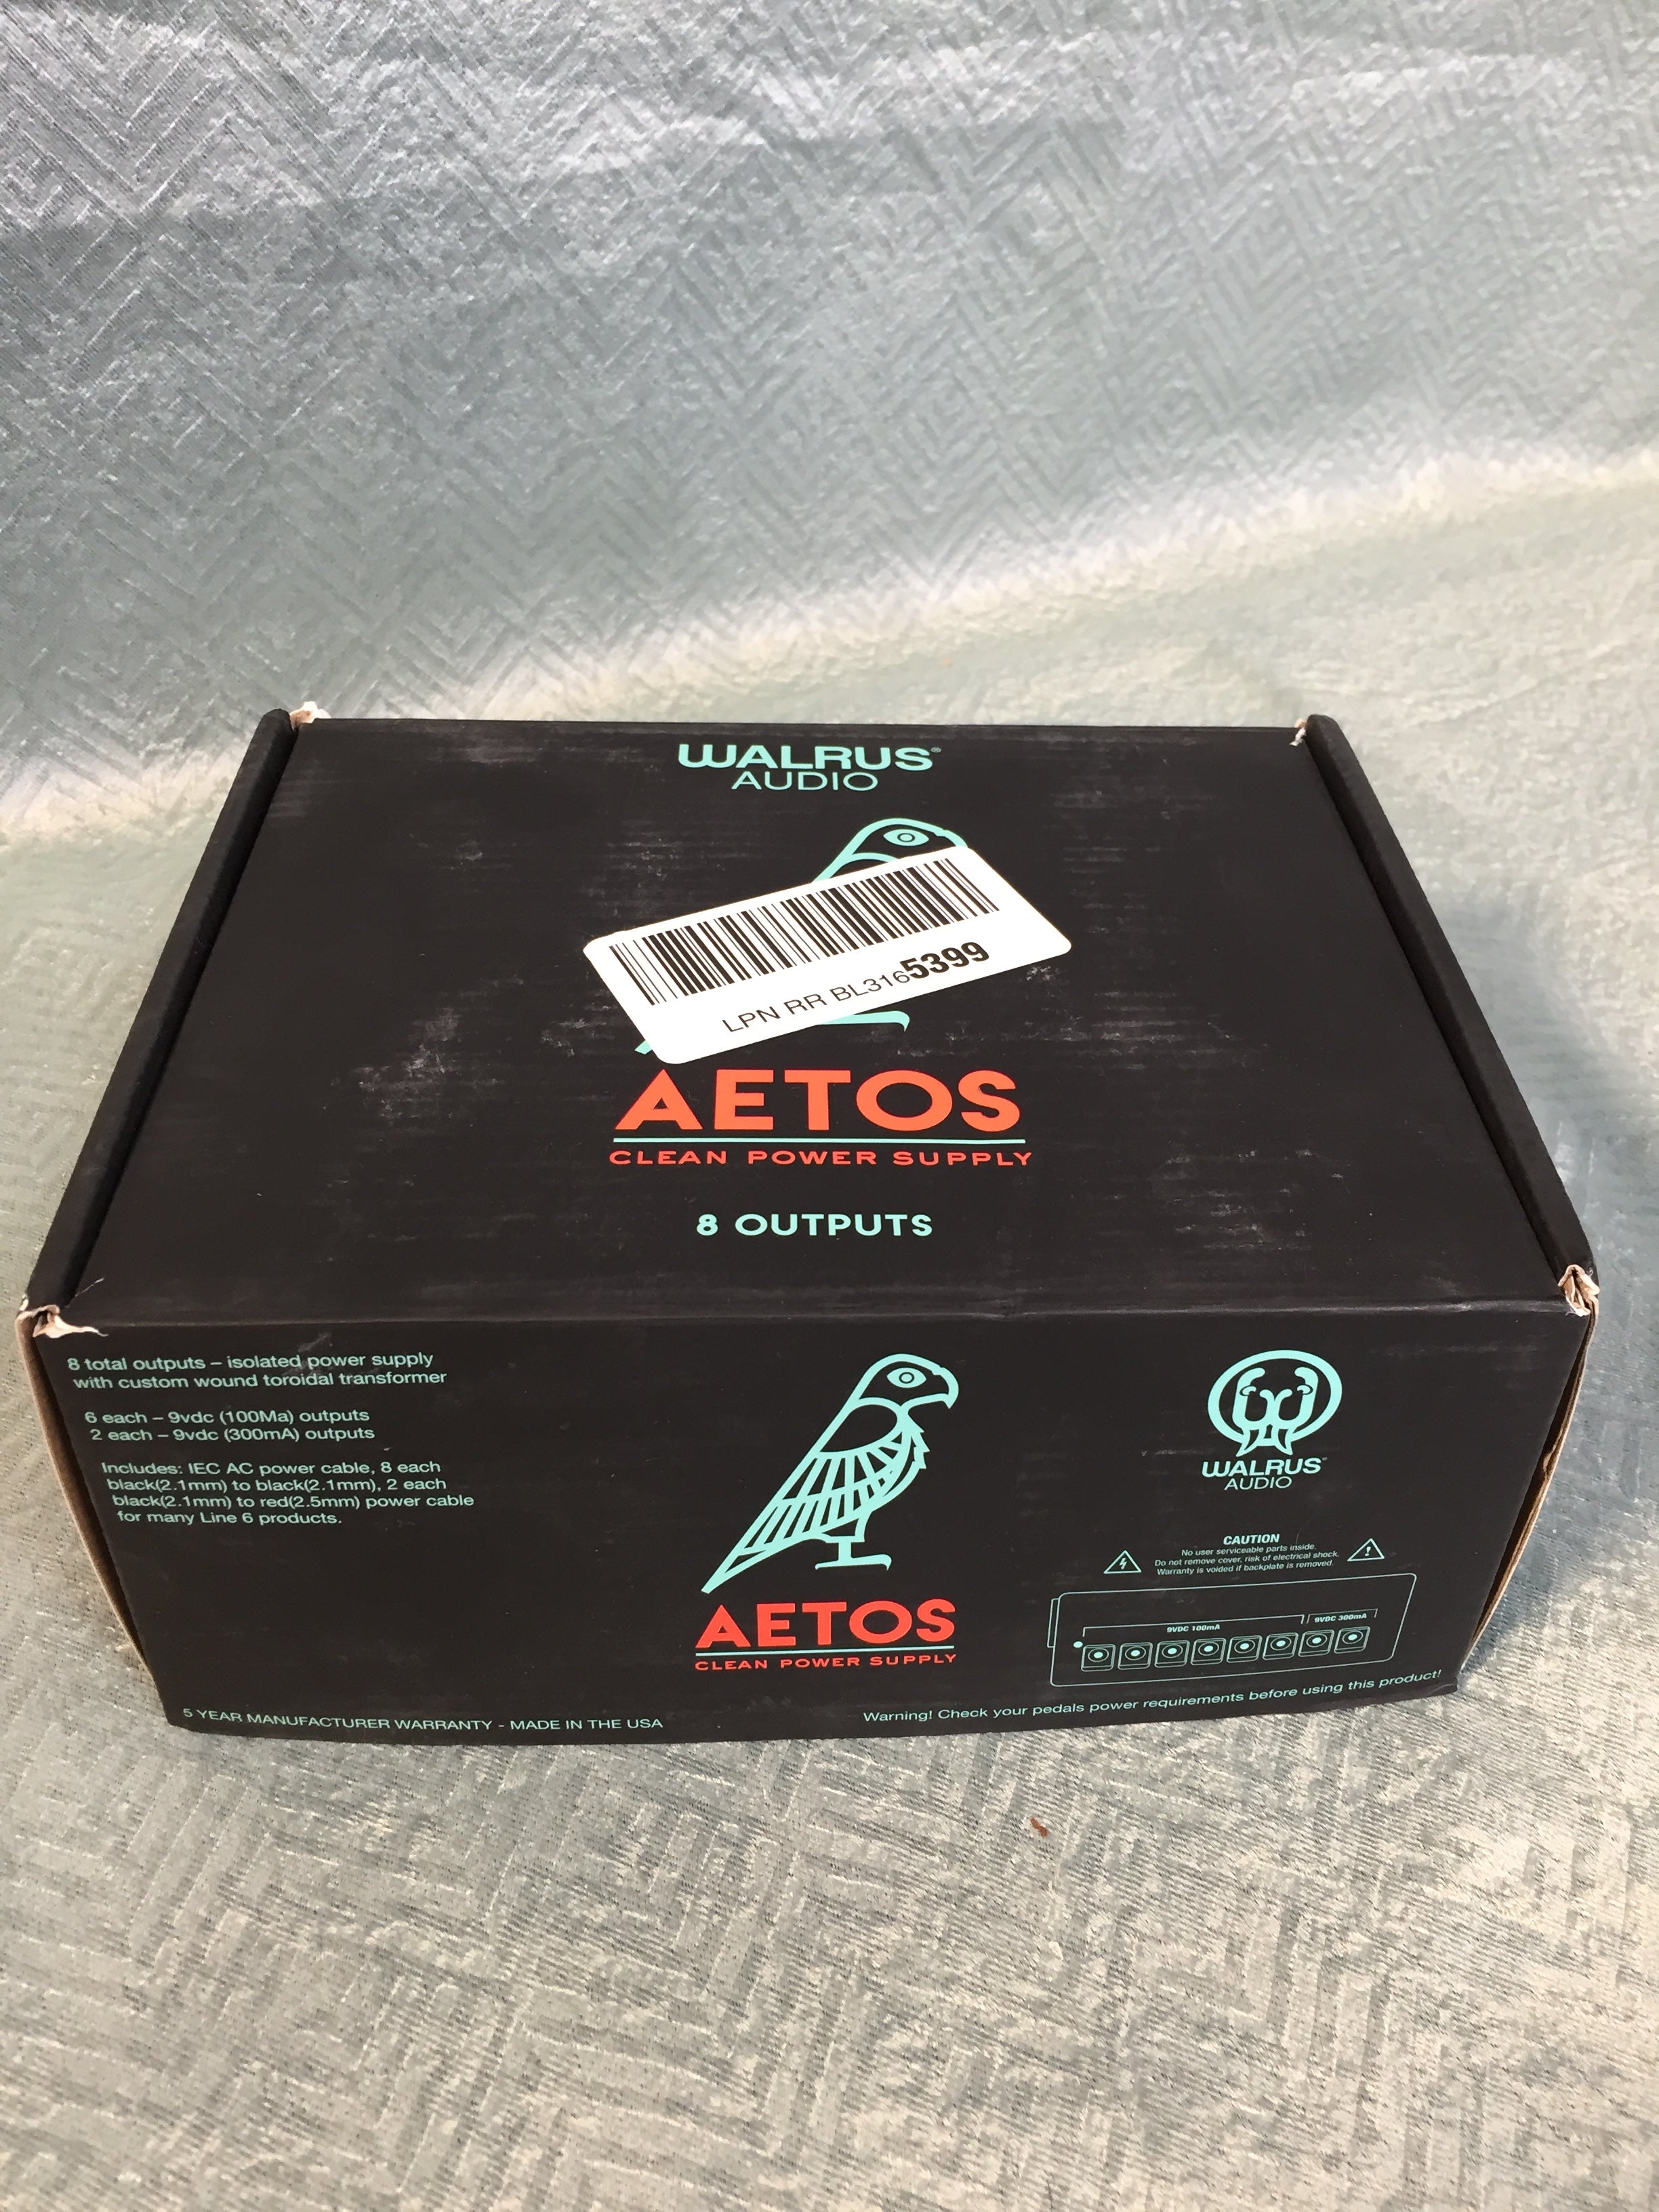 Walrus Audio Aetos 8 Output 120 Volt Power Supply, Limited Edition Red (7516423061742)